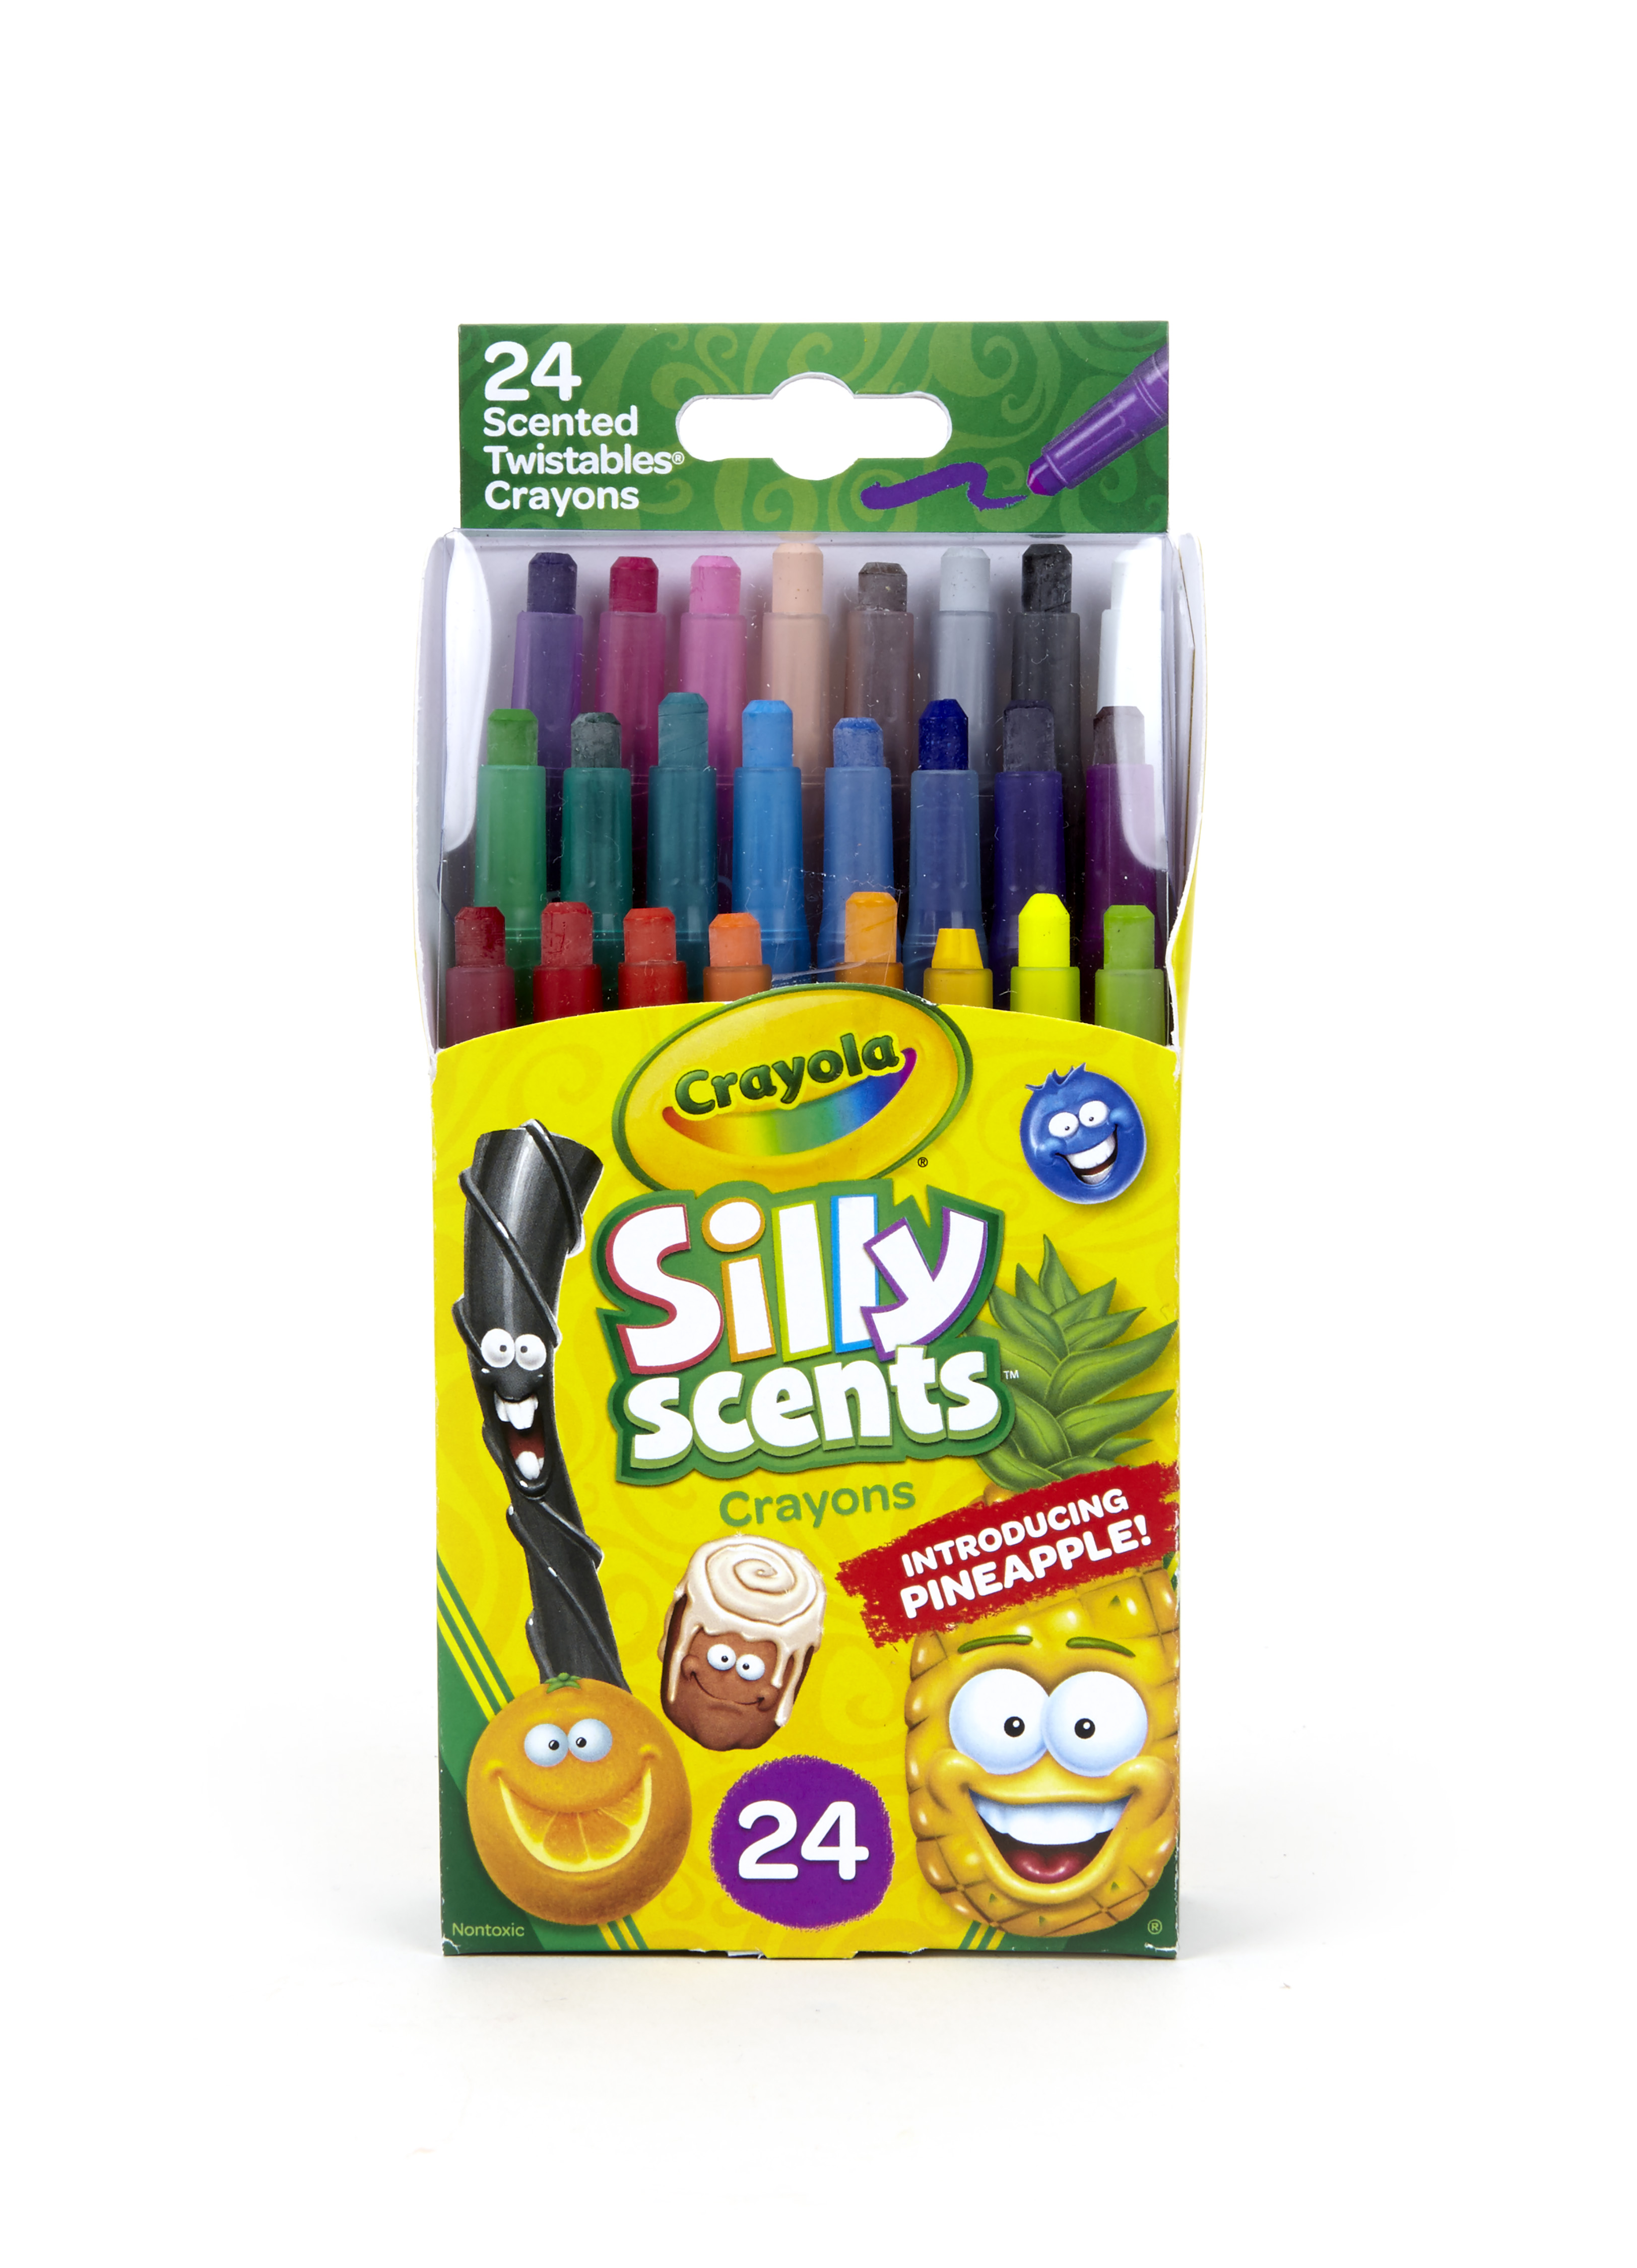 Crayola Silly Scents Twistables Crayons, Sweet Scented Crayons for Kids, 24 Count - image 4 of 8